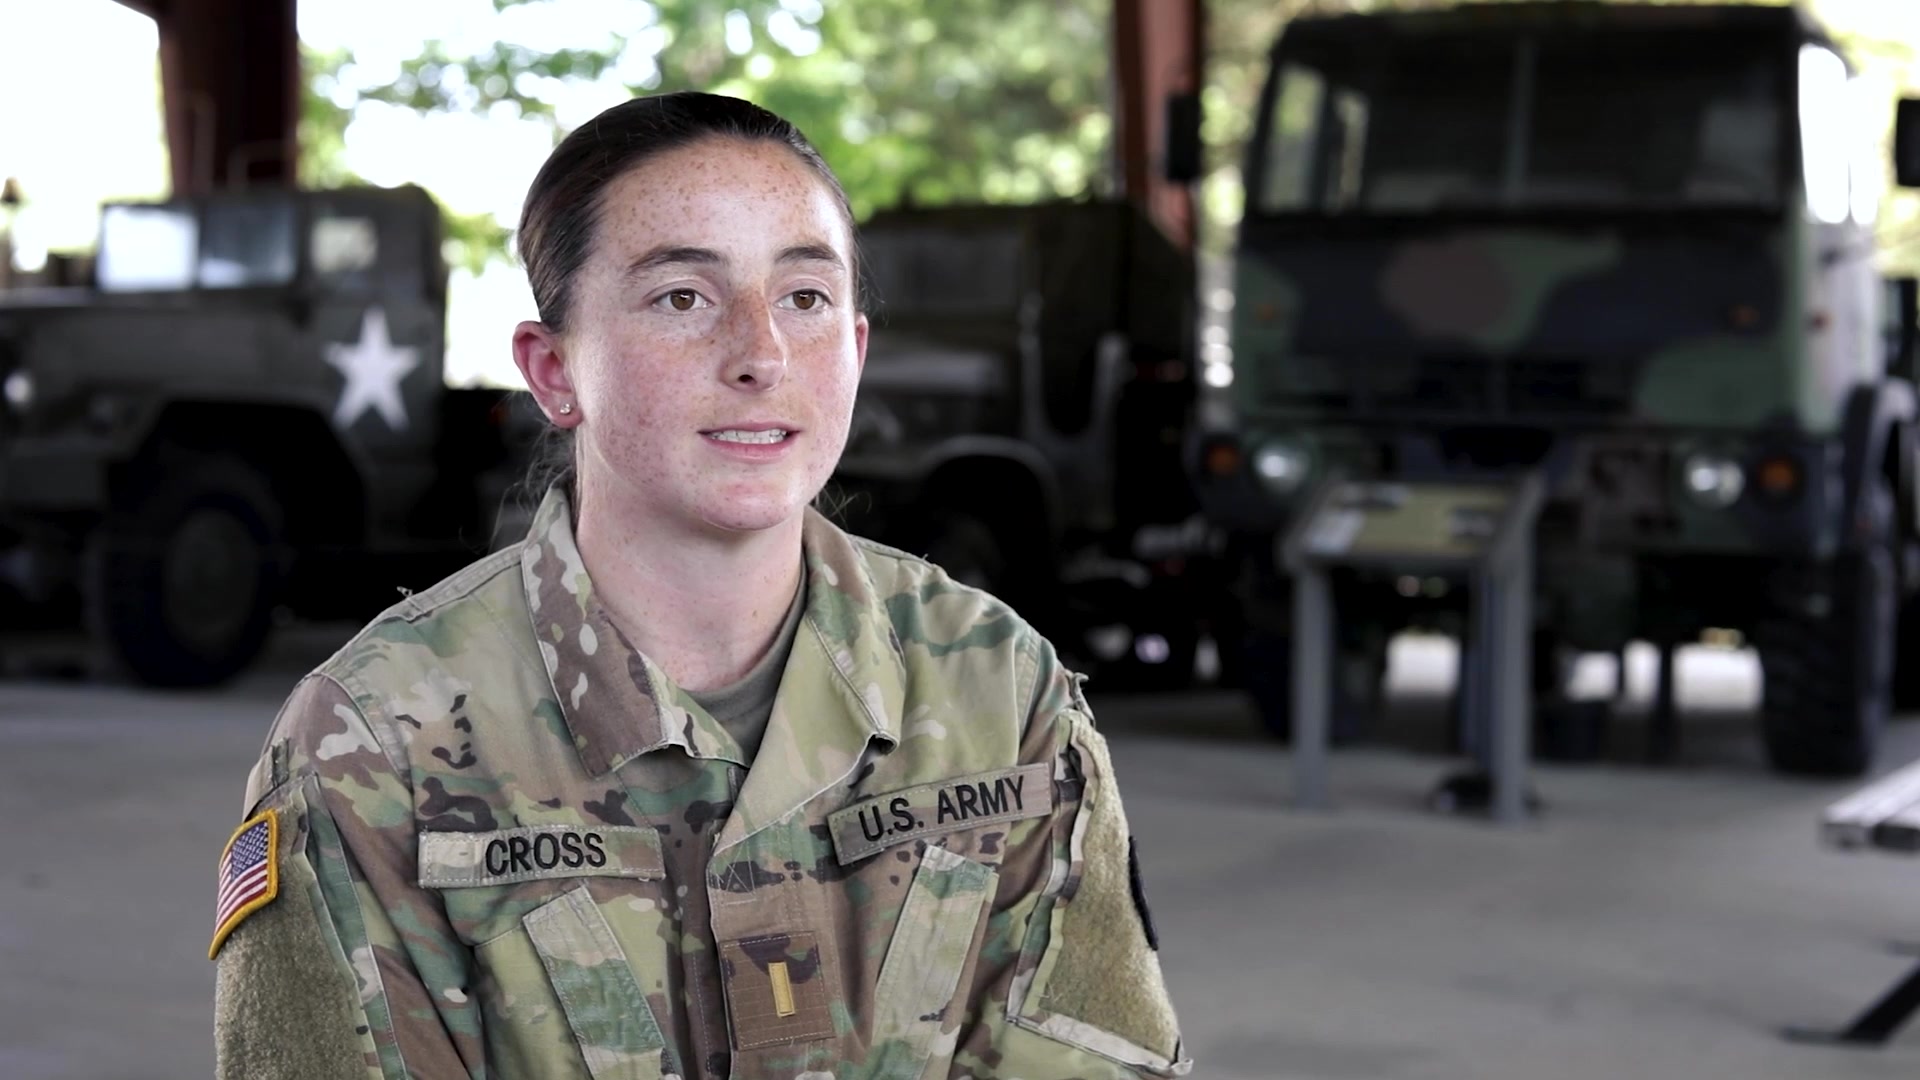 2LT Isabella Cross shares how the Army Reserve Minuteman Scholarship helped shape her success after college.

Video By Tim Yao